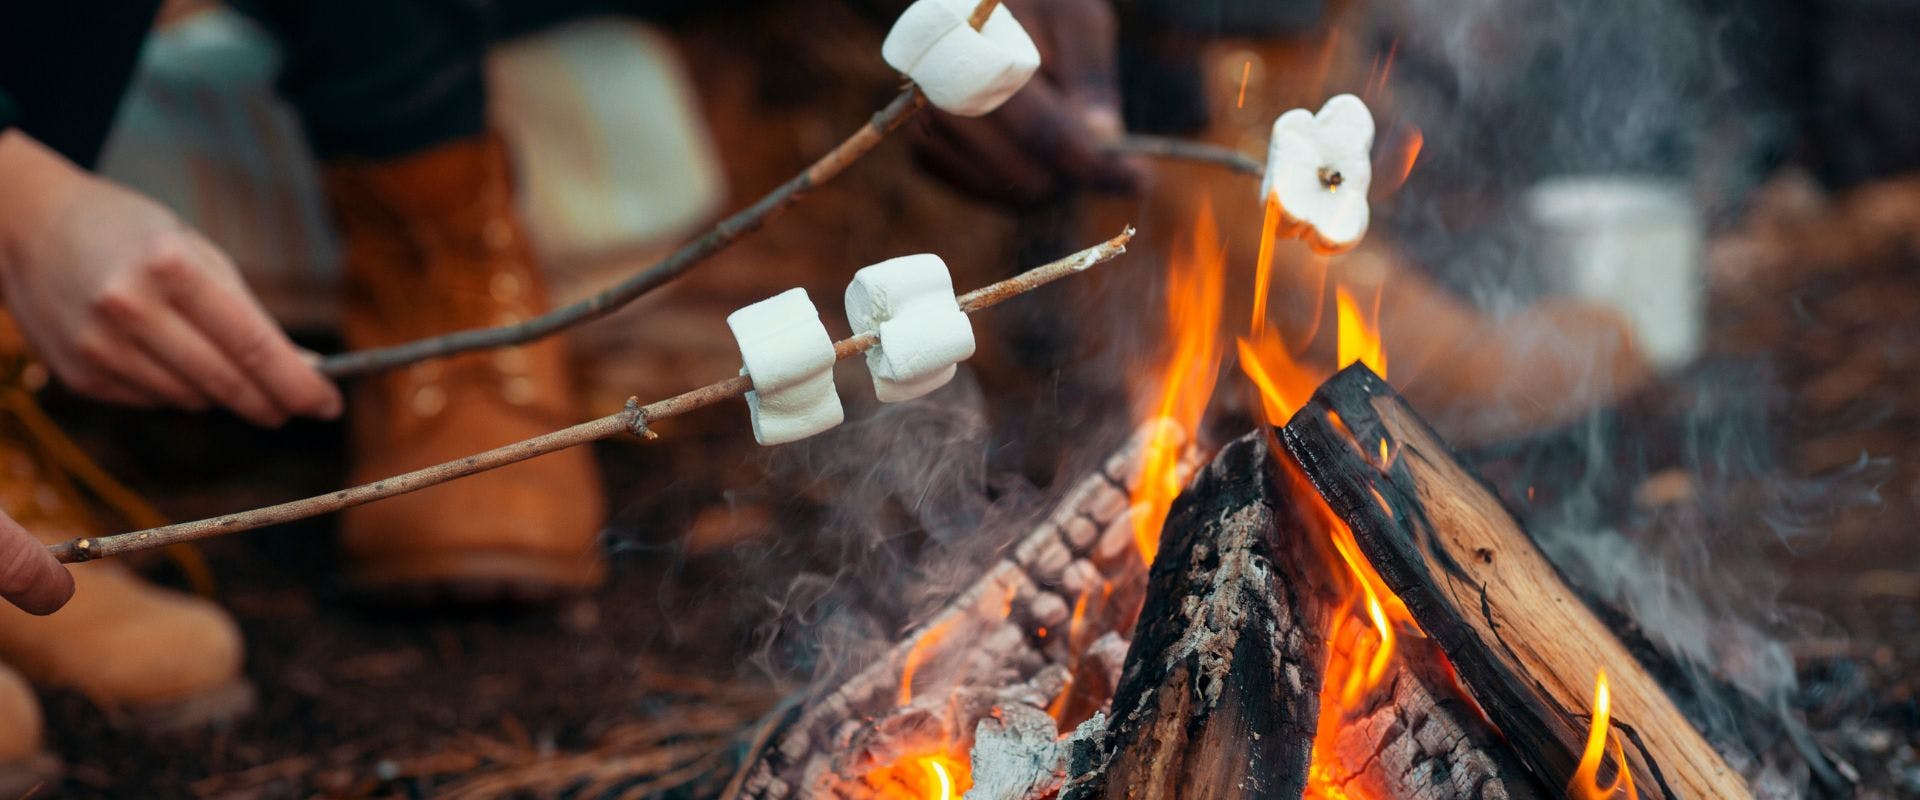 Marshmallows being toasted on a fire